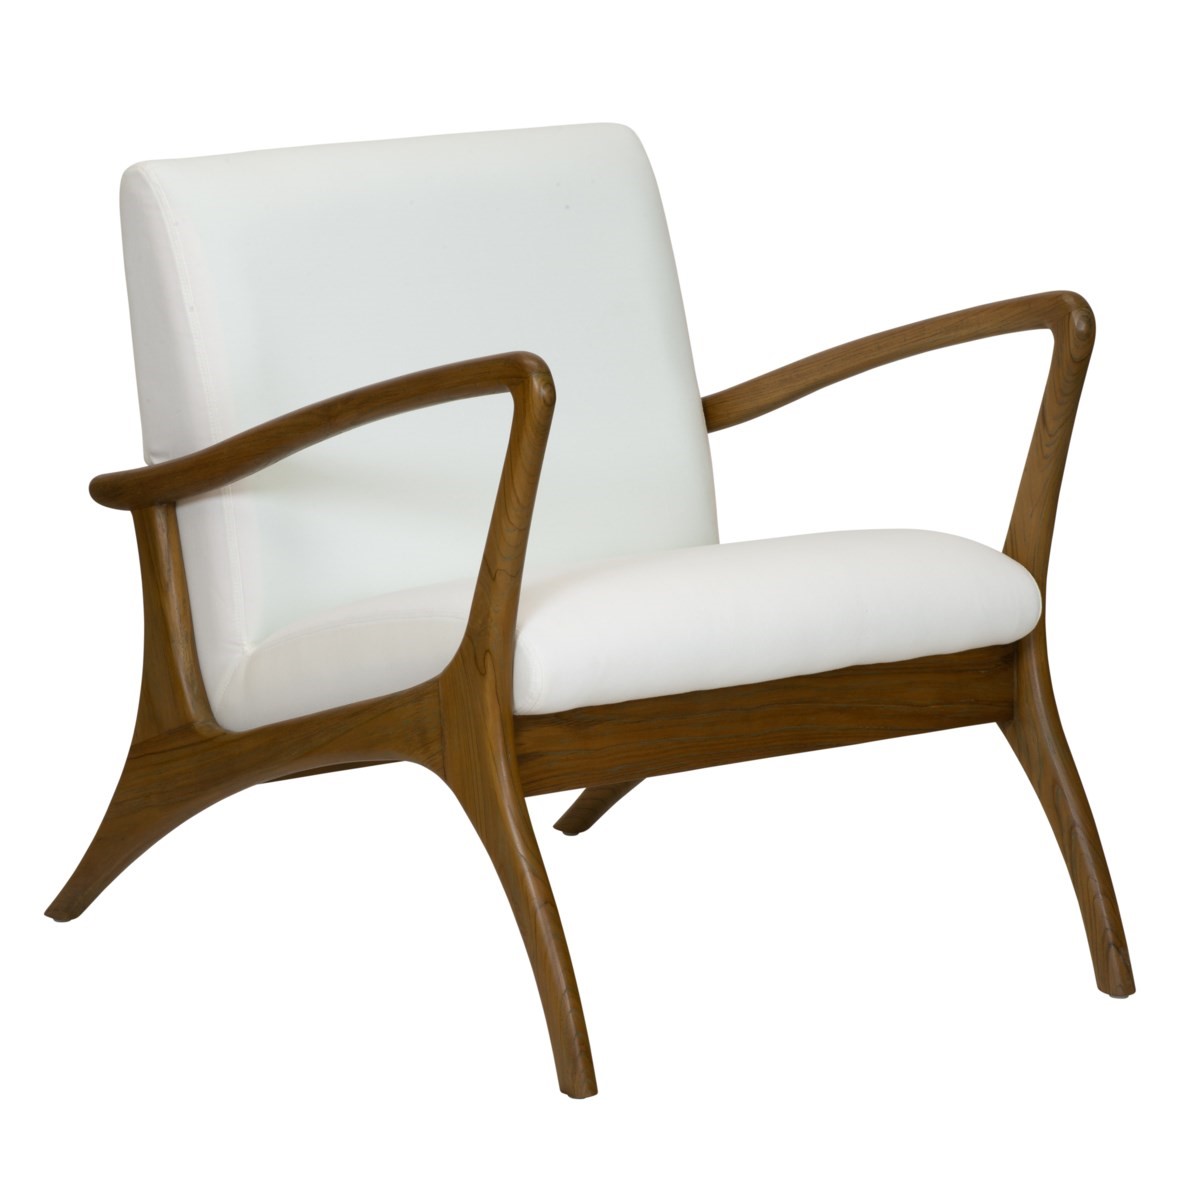 Bella Mid Century Modern White Upholstered Teak Wood Outdoor Lounge Chair Kathy Kuo Home Havenly